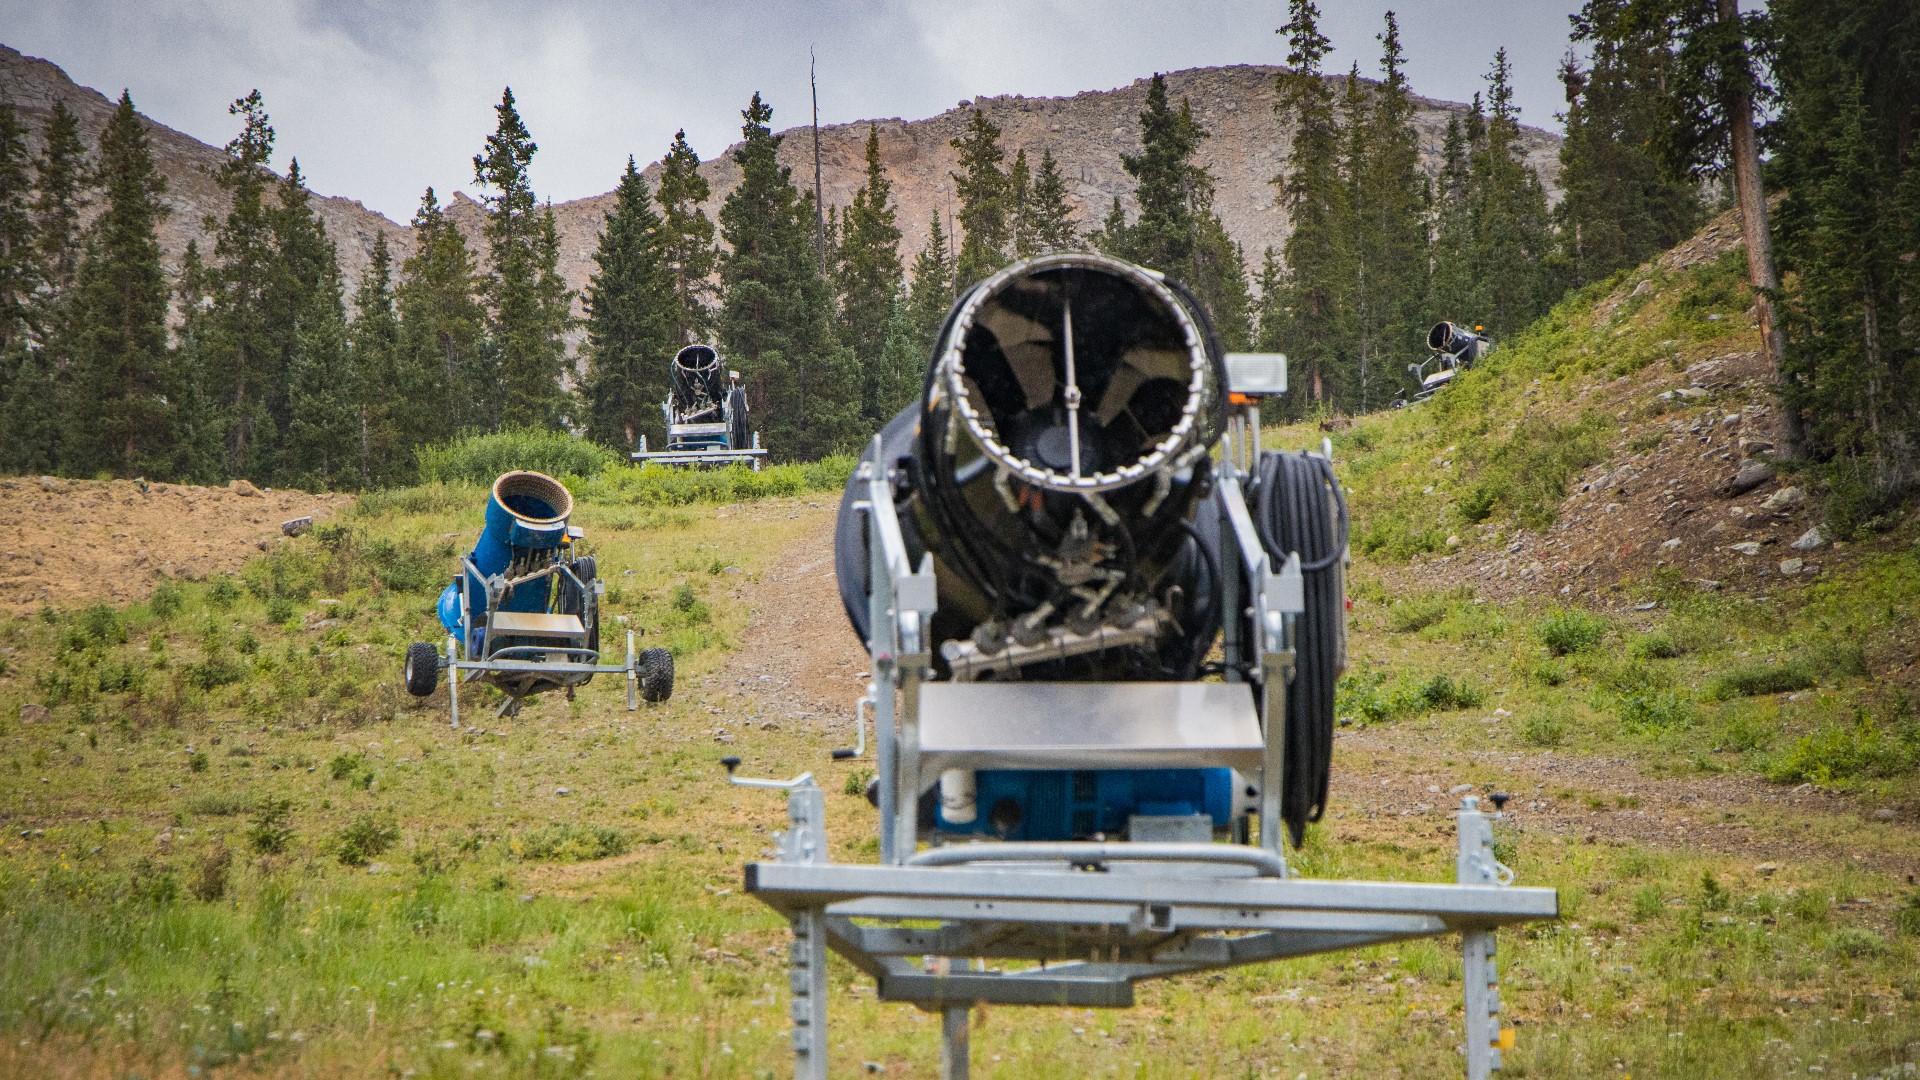 Arapahoe Basin is already thinking about snowmaking, having positioned their snow guns across the mountainside. A-Basin says its snow guns will be tested in the coming days with the goal of opening in mid-October. Arapahoe Basin Ski Resort is located 68 miles west of Denver in Summit County, Colorado. The resort has 125 snow-making acres and receives 350 inches of snowfall on average.